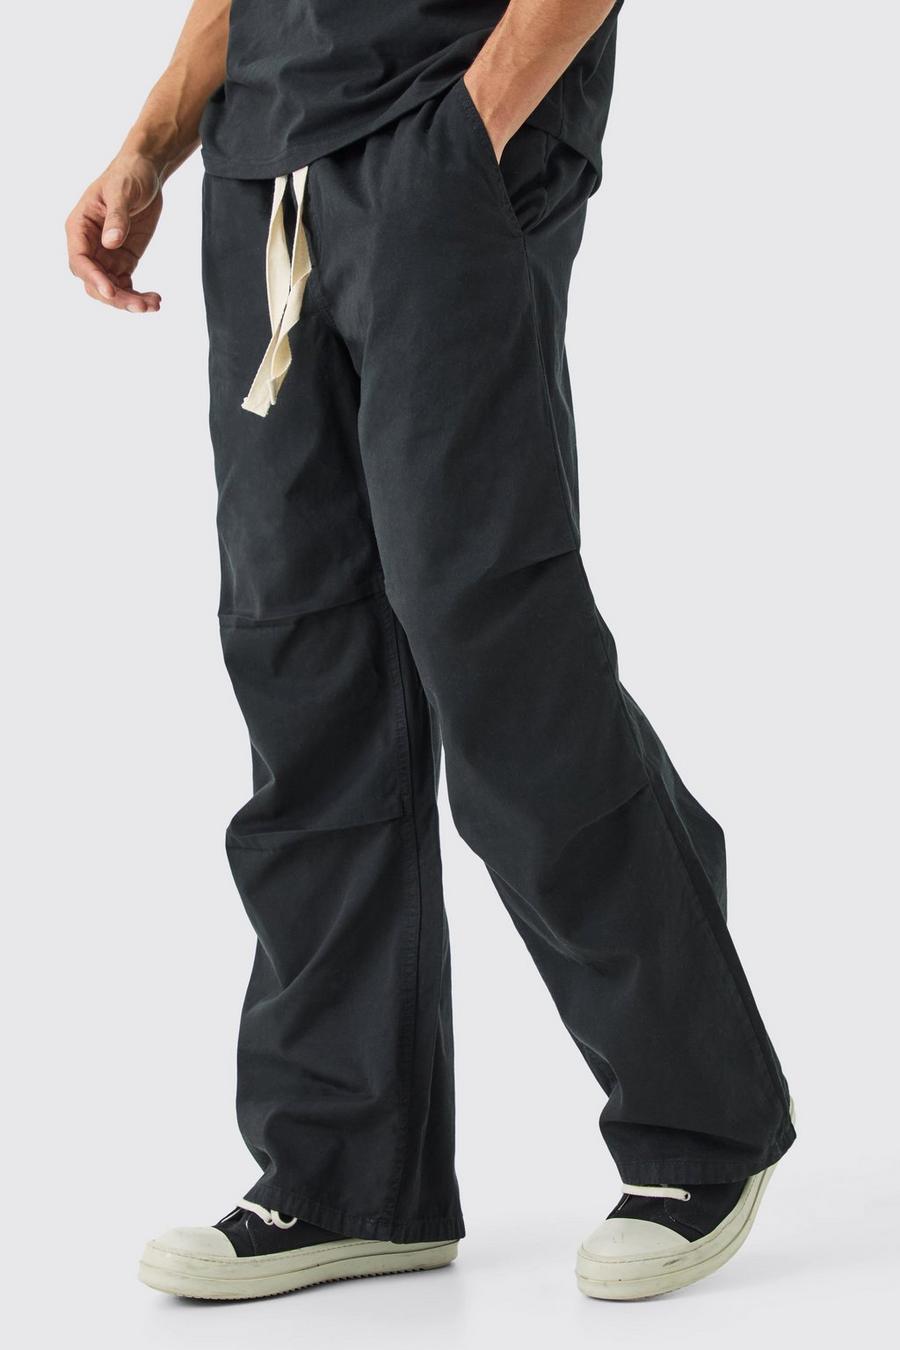 Black Elastic Waist Contrast Drawcord Extreme Baggy Pants image number 1